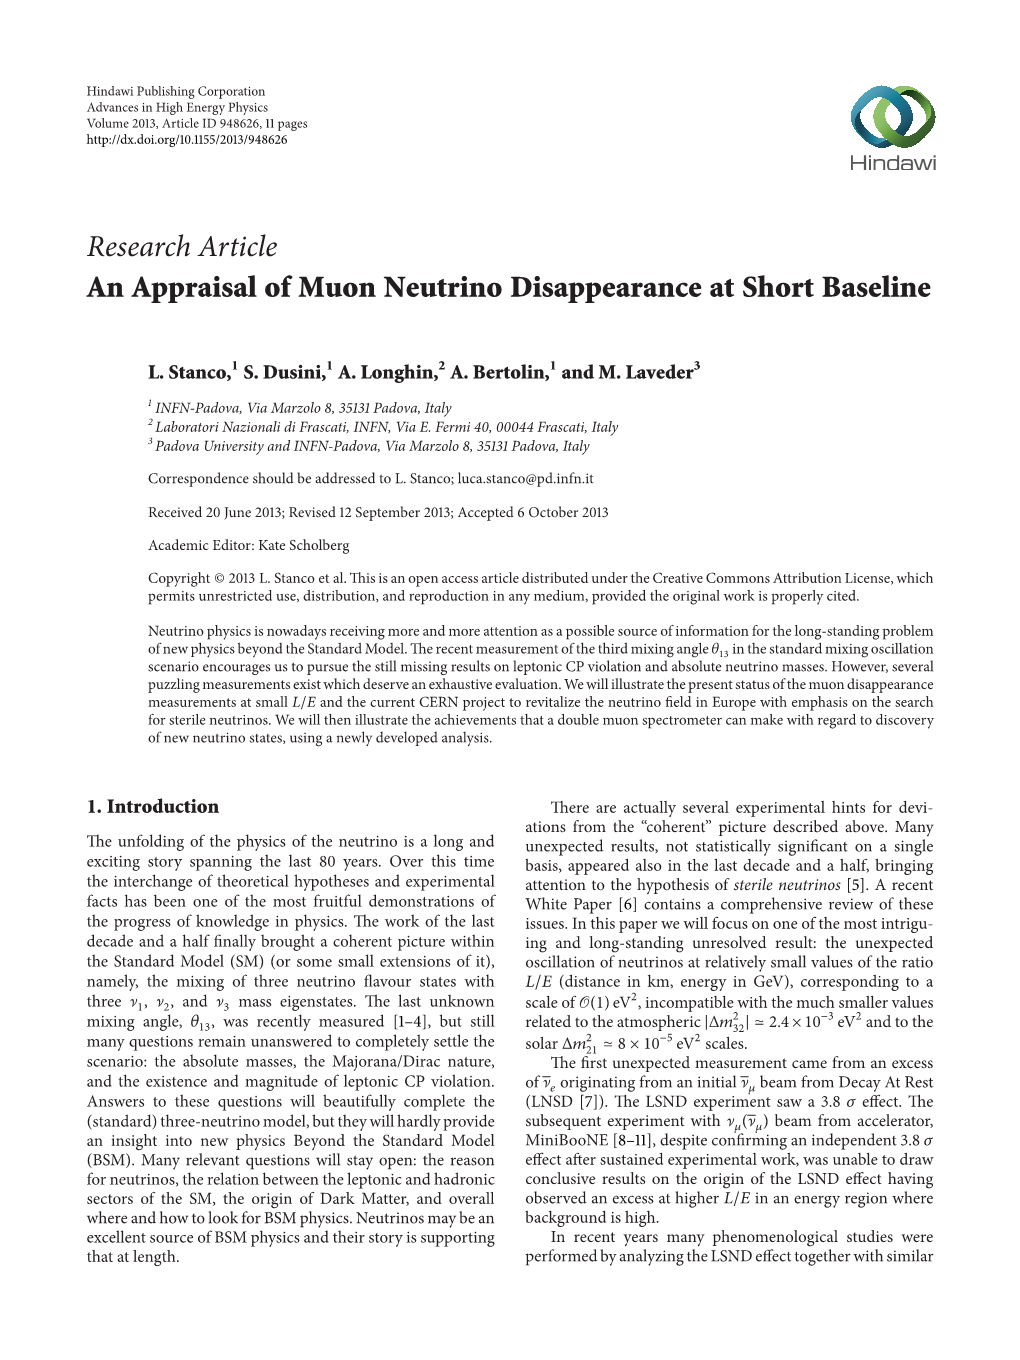 Research Article an Appraisal of Muon Neutrino Disappearance at Short Baseline